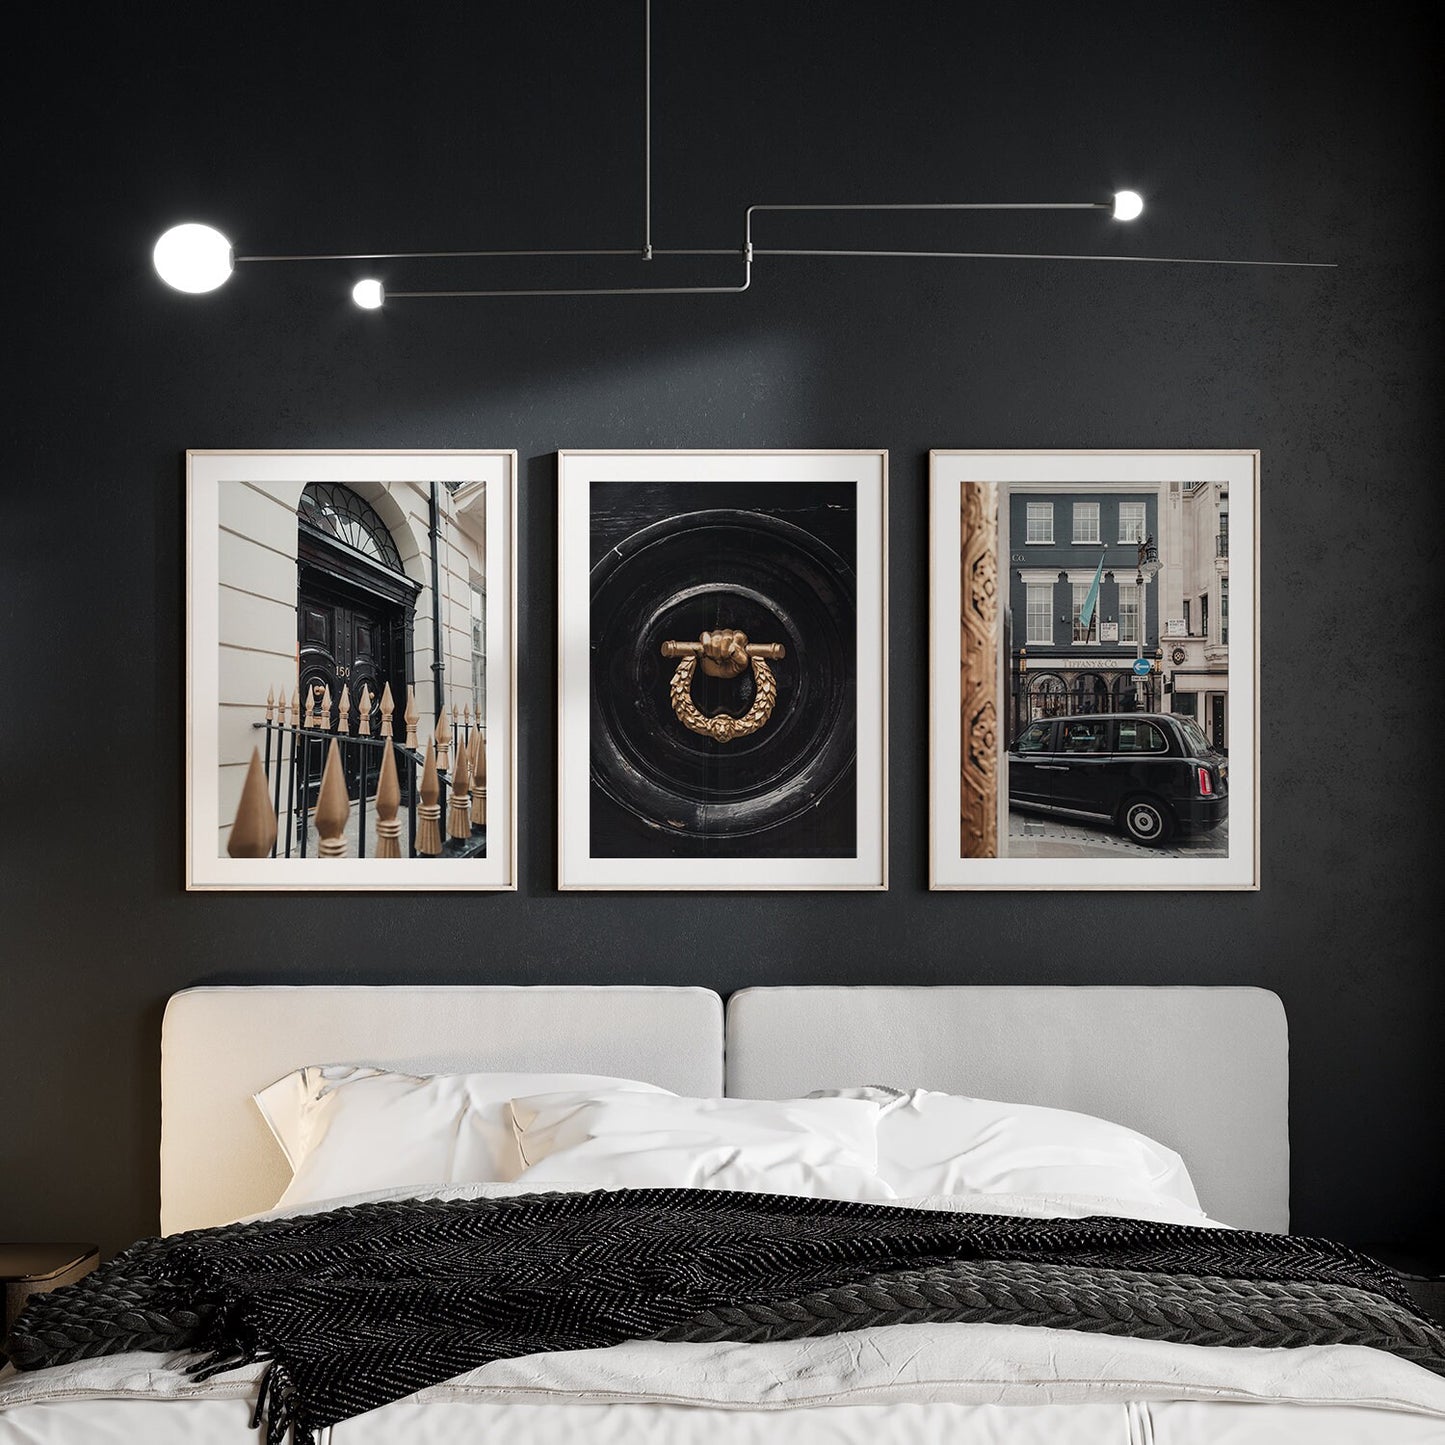 London Photography Gallery Set of 3 Pieces Wall Art London Wall Art Elegant Decor Ideas Fine Art Set of 3 Black and Gold Framed Photo Large